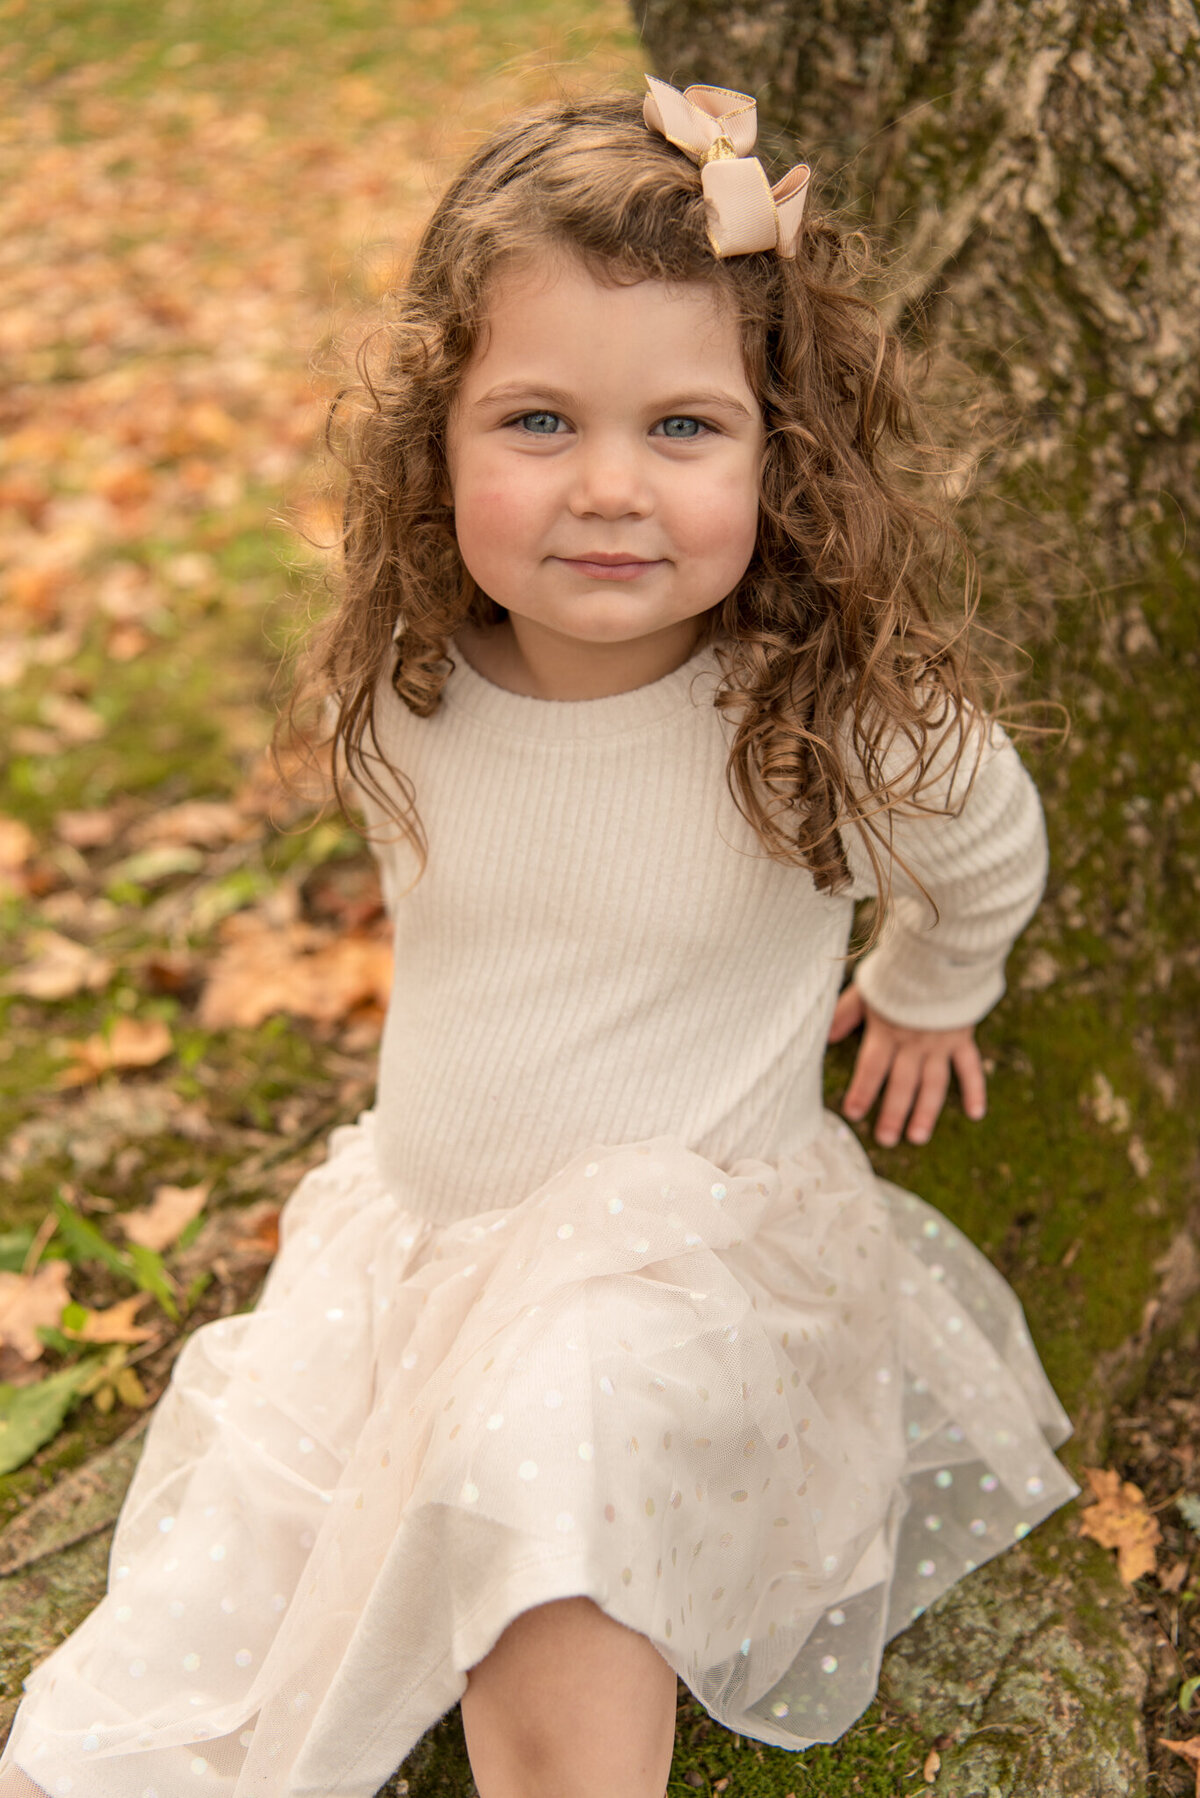 Three year old girl is sitting at the base of a tree in a white dress, smiling at the camera with a bow in her hair